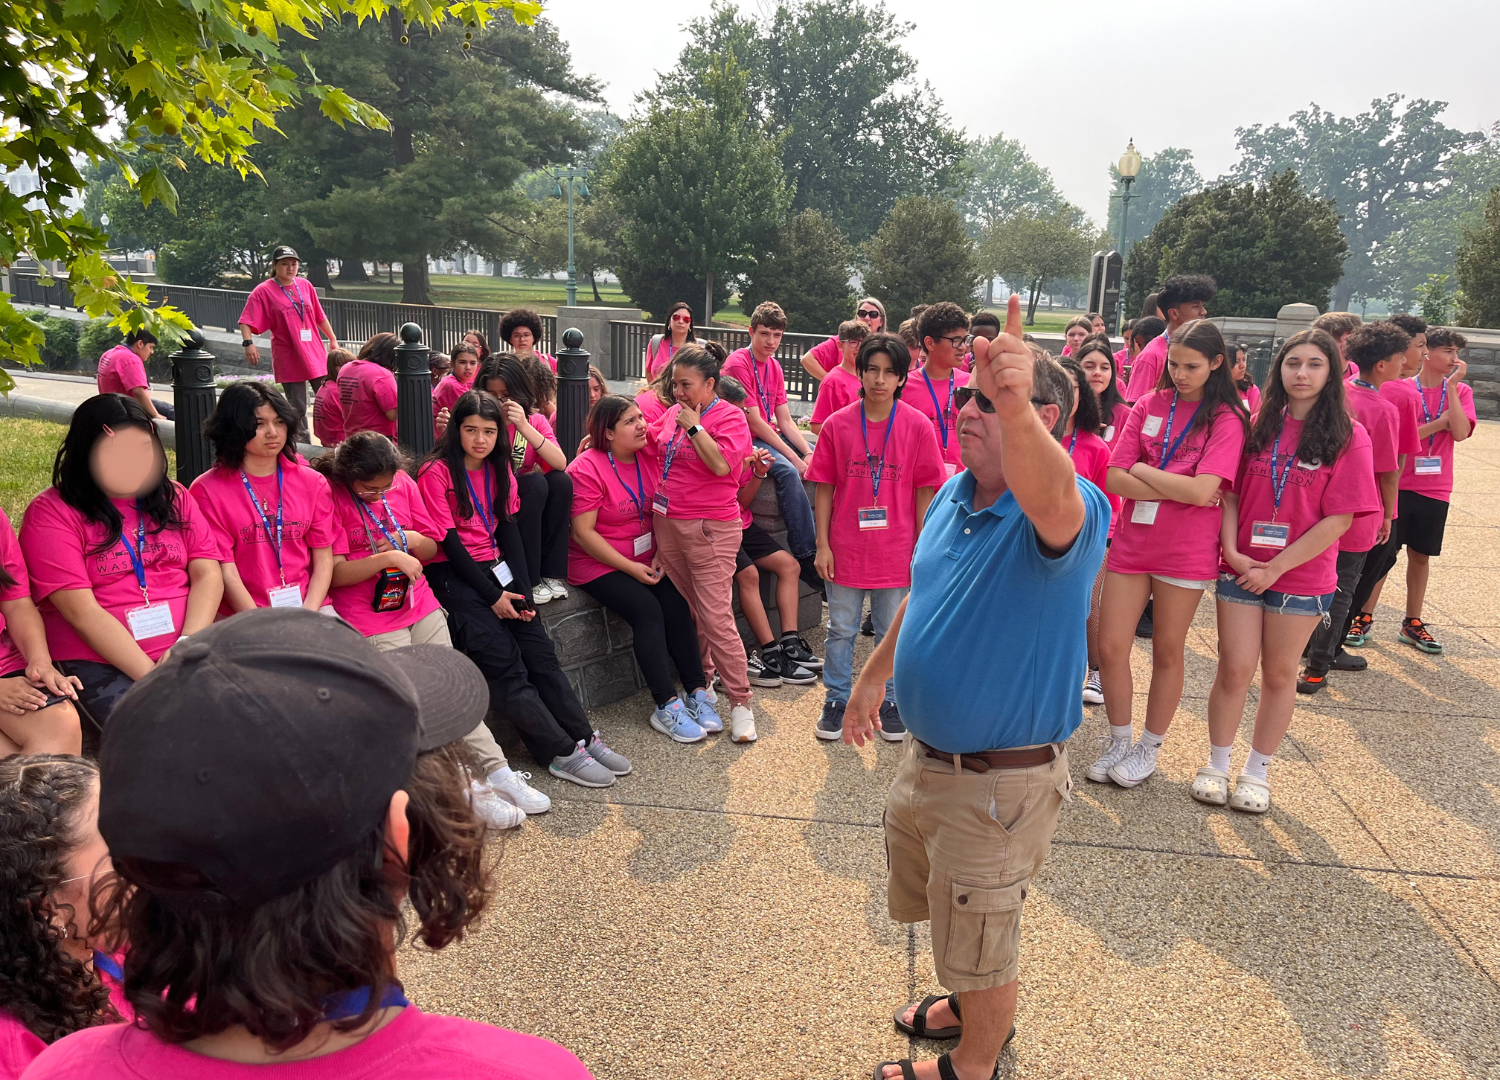 Tour guide stops the group to point out some iconic sites in Washington D.C.